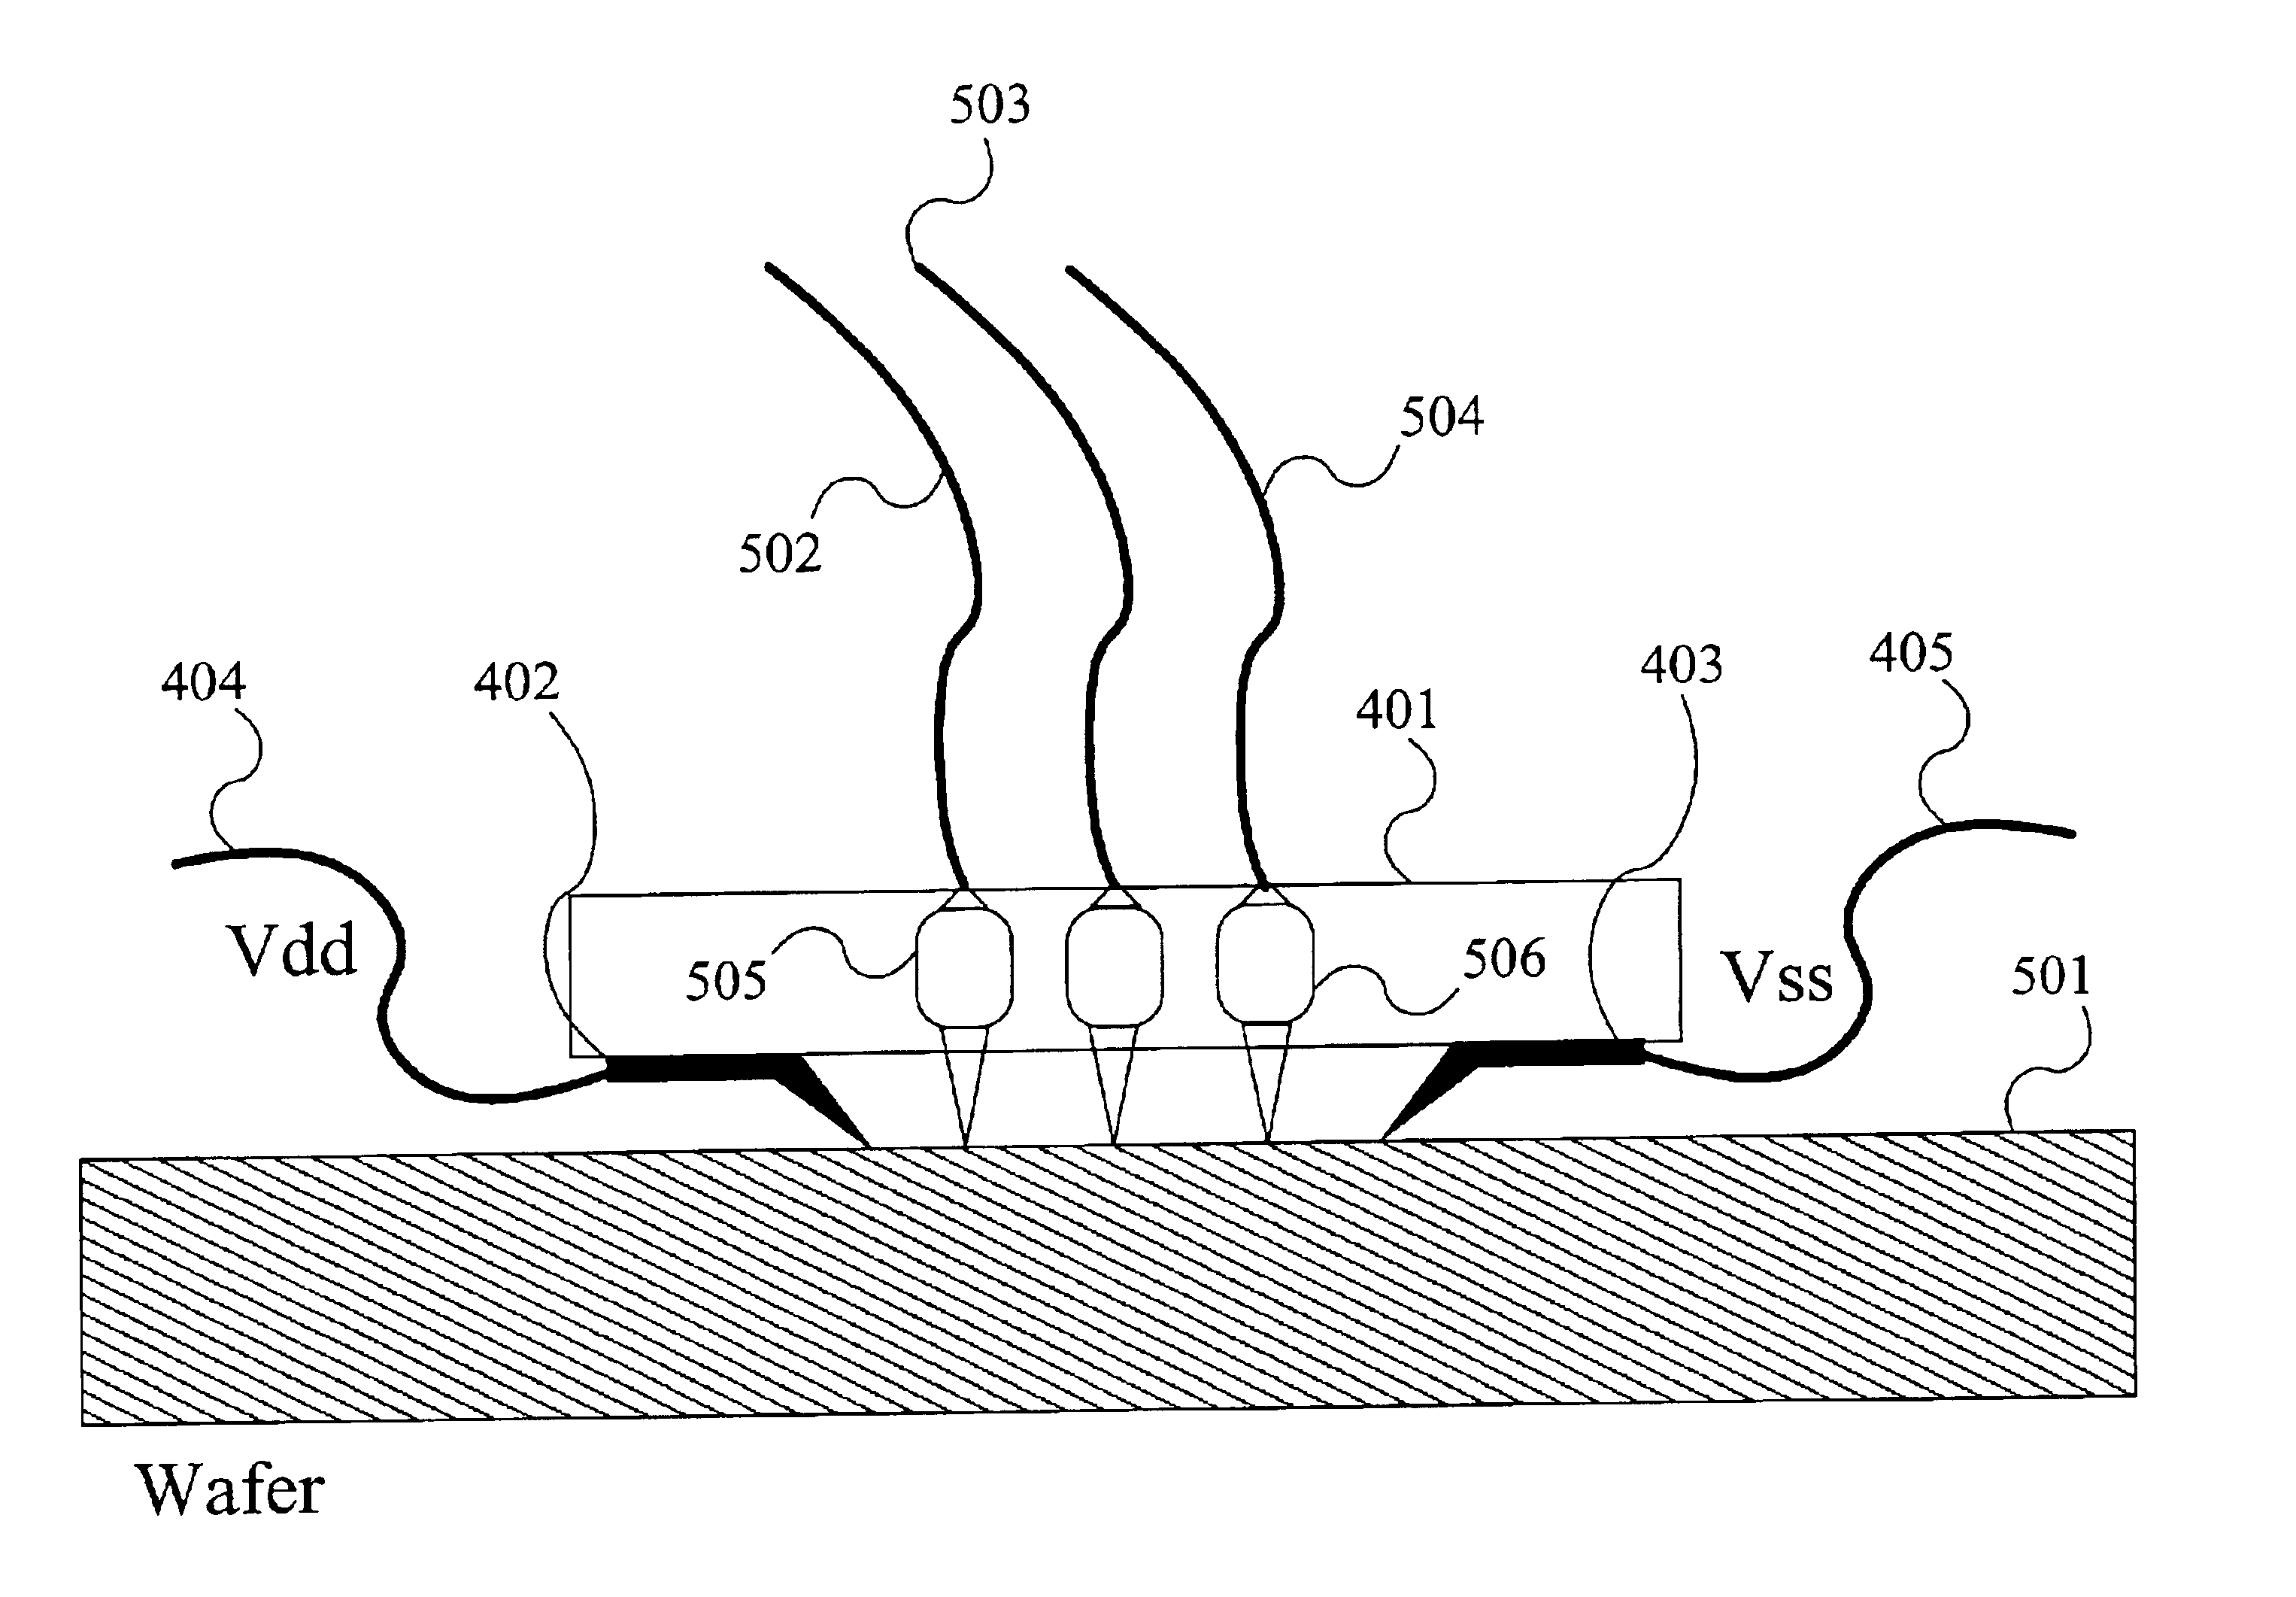 Apparatus and method for dynamic diagnostic testing of integrated circuits